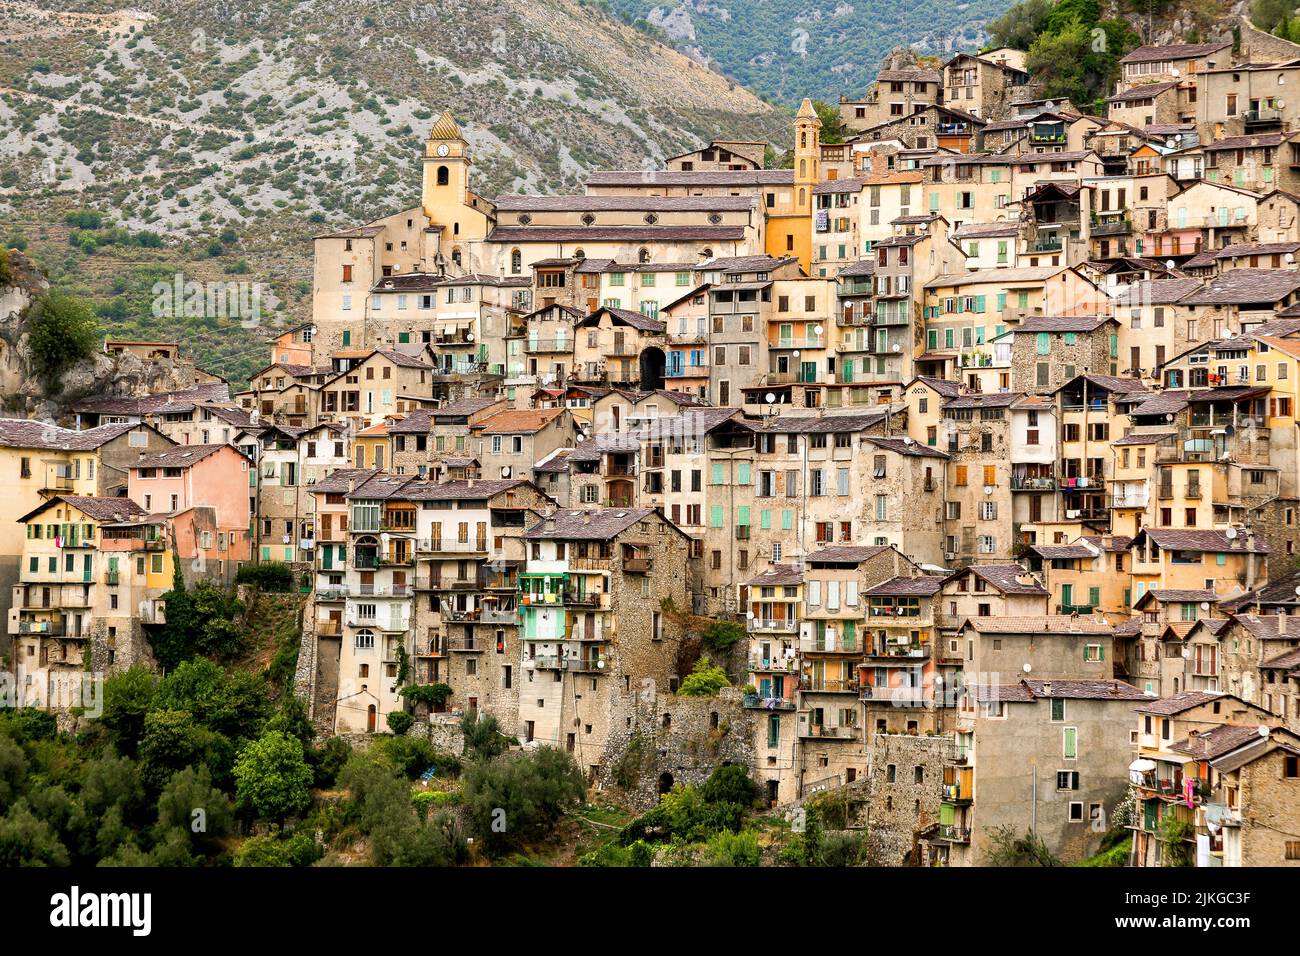 Saorge is a very beautiful medieval town in Alpes-Maritimes department in southeastern France. Stock Photo